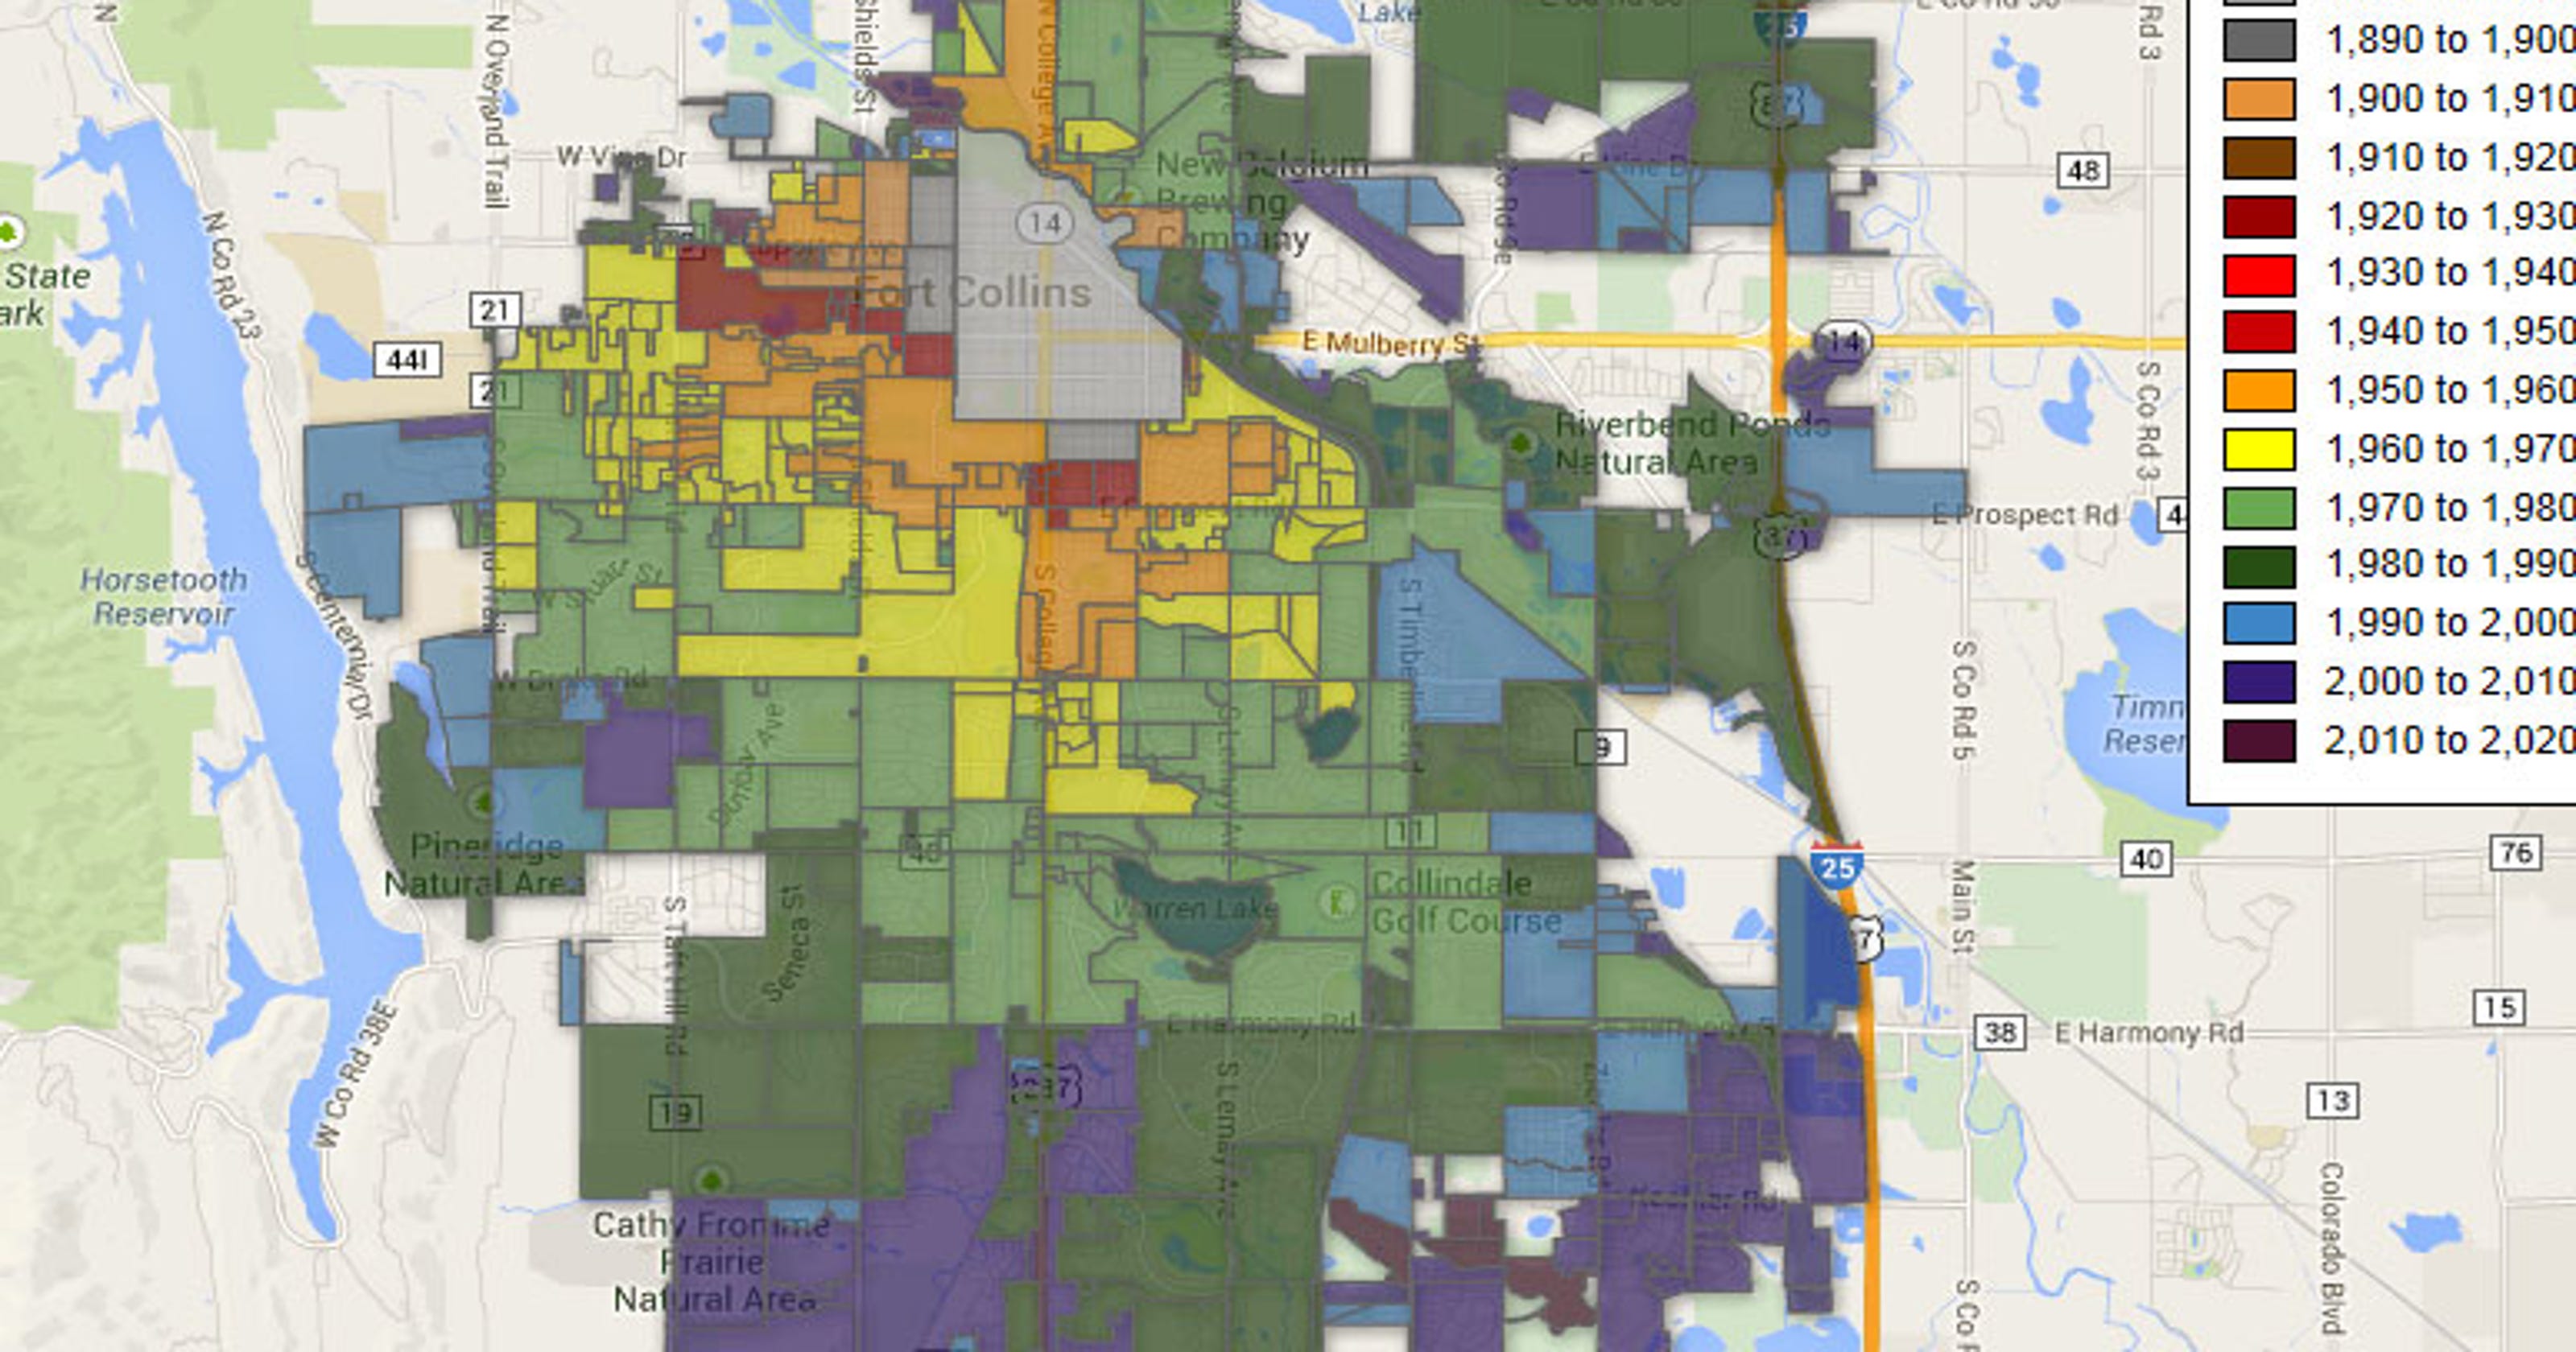 Map Fort Collins city, population growth (18702014)